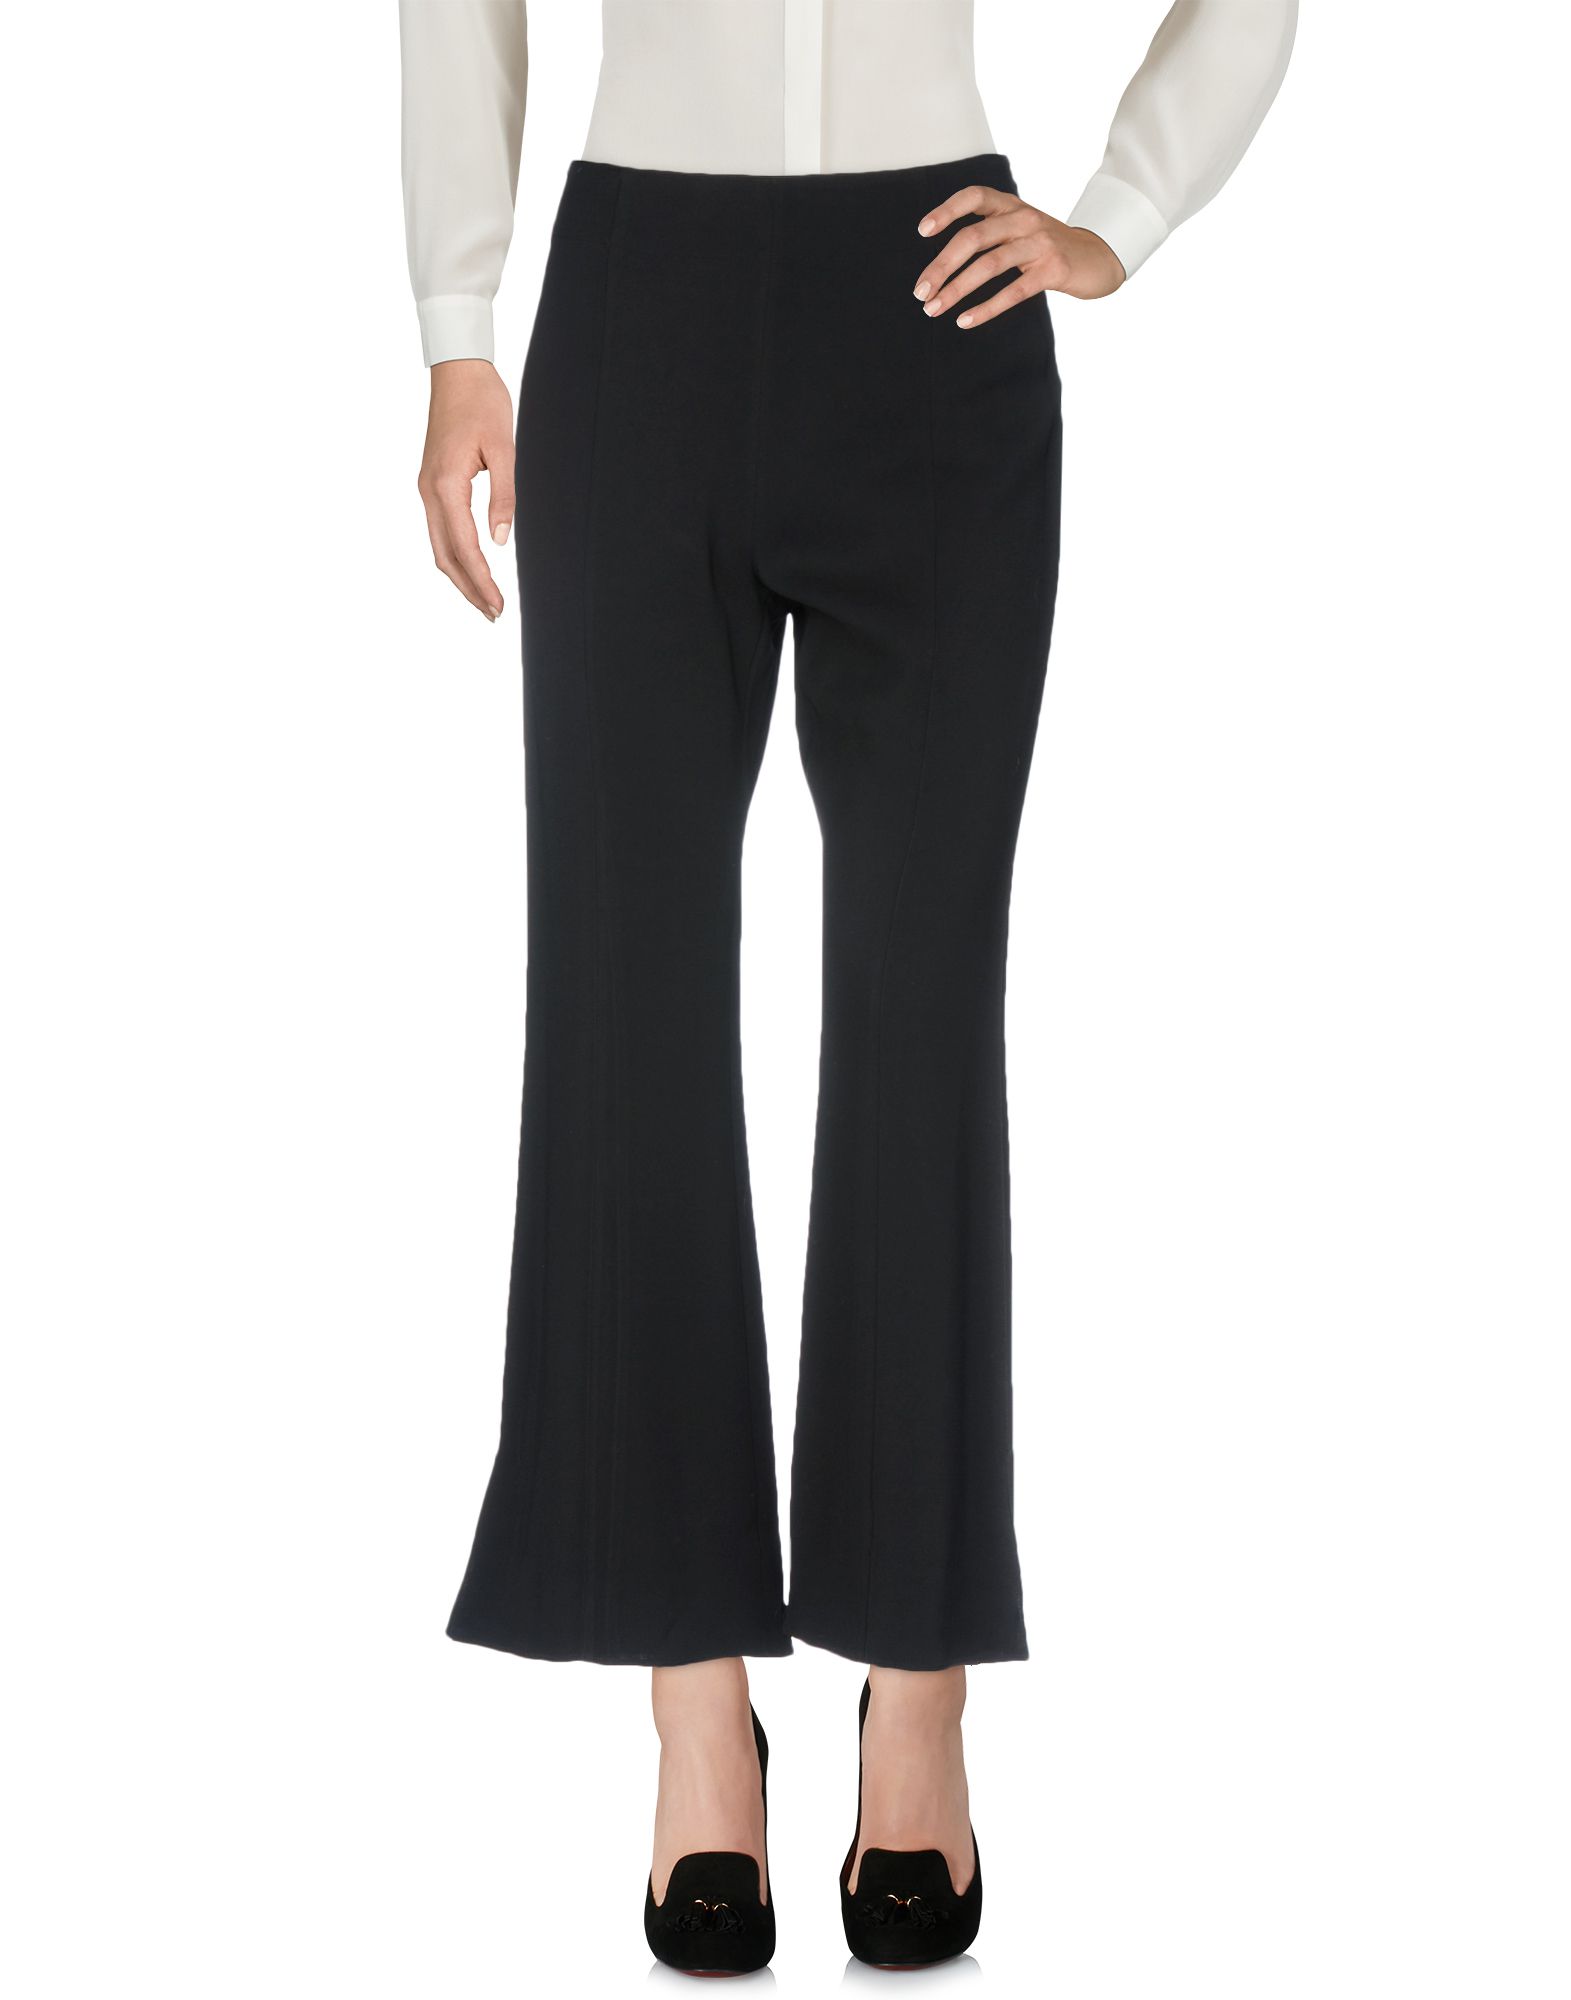 ELIZABETH AND JAMES Casual pants,13175348AB 5